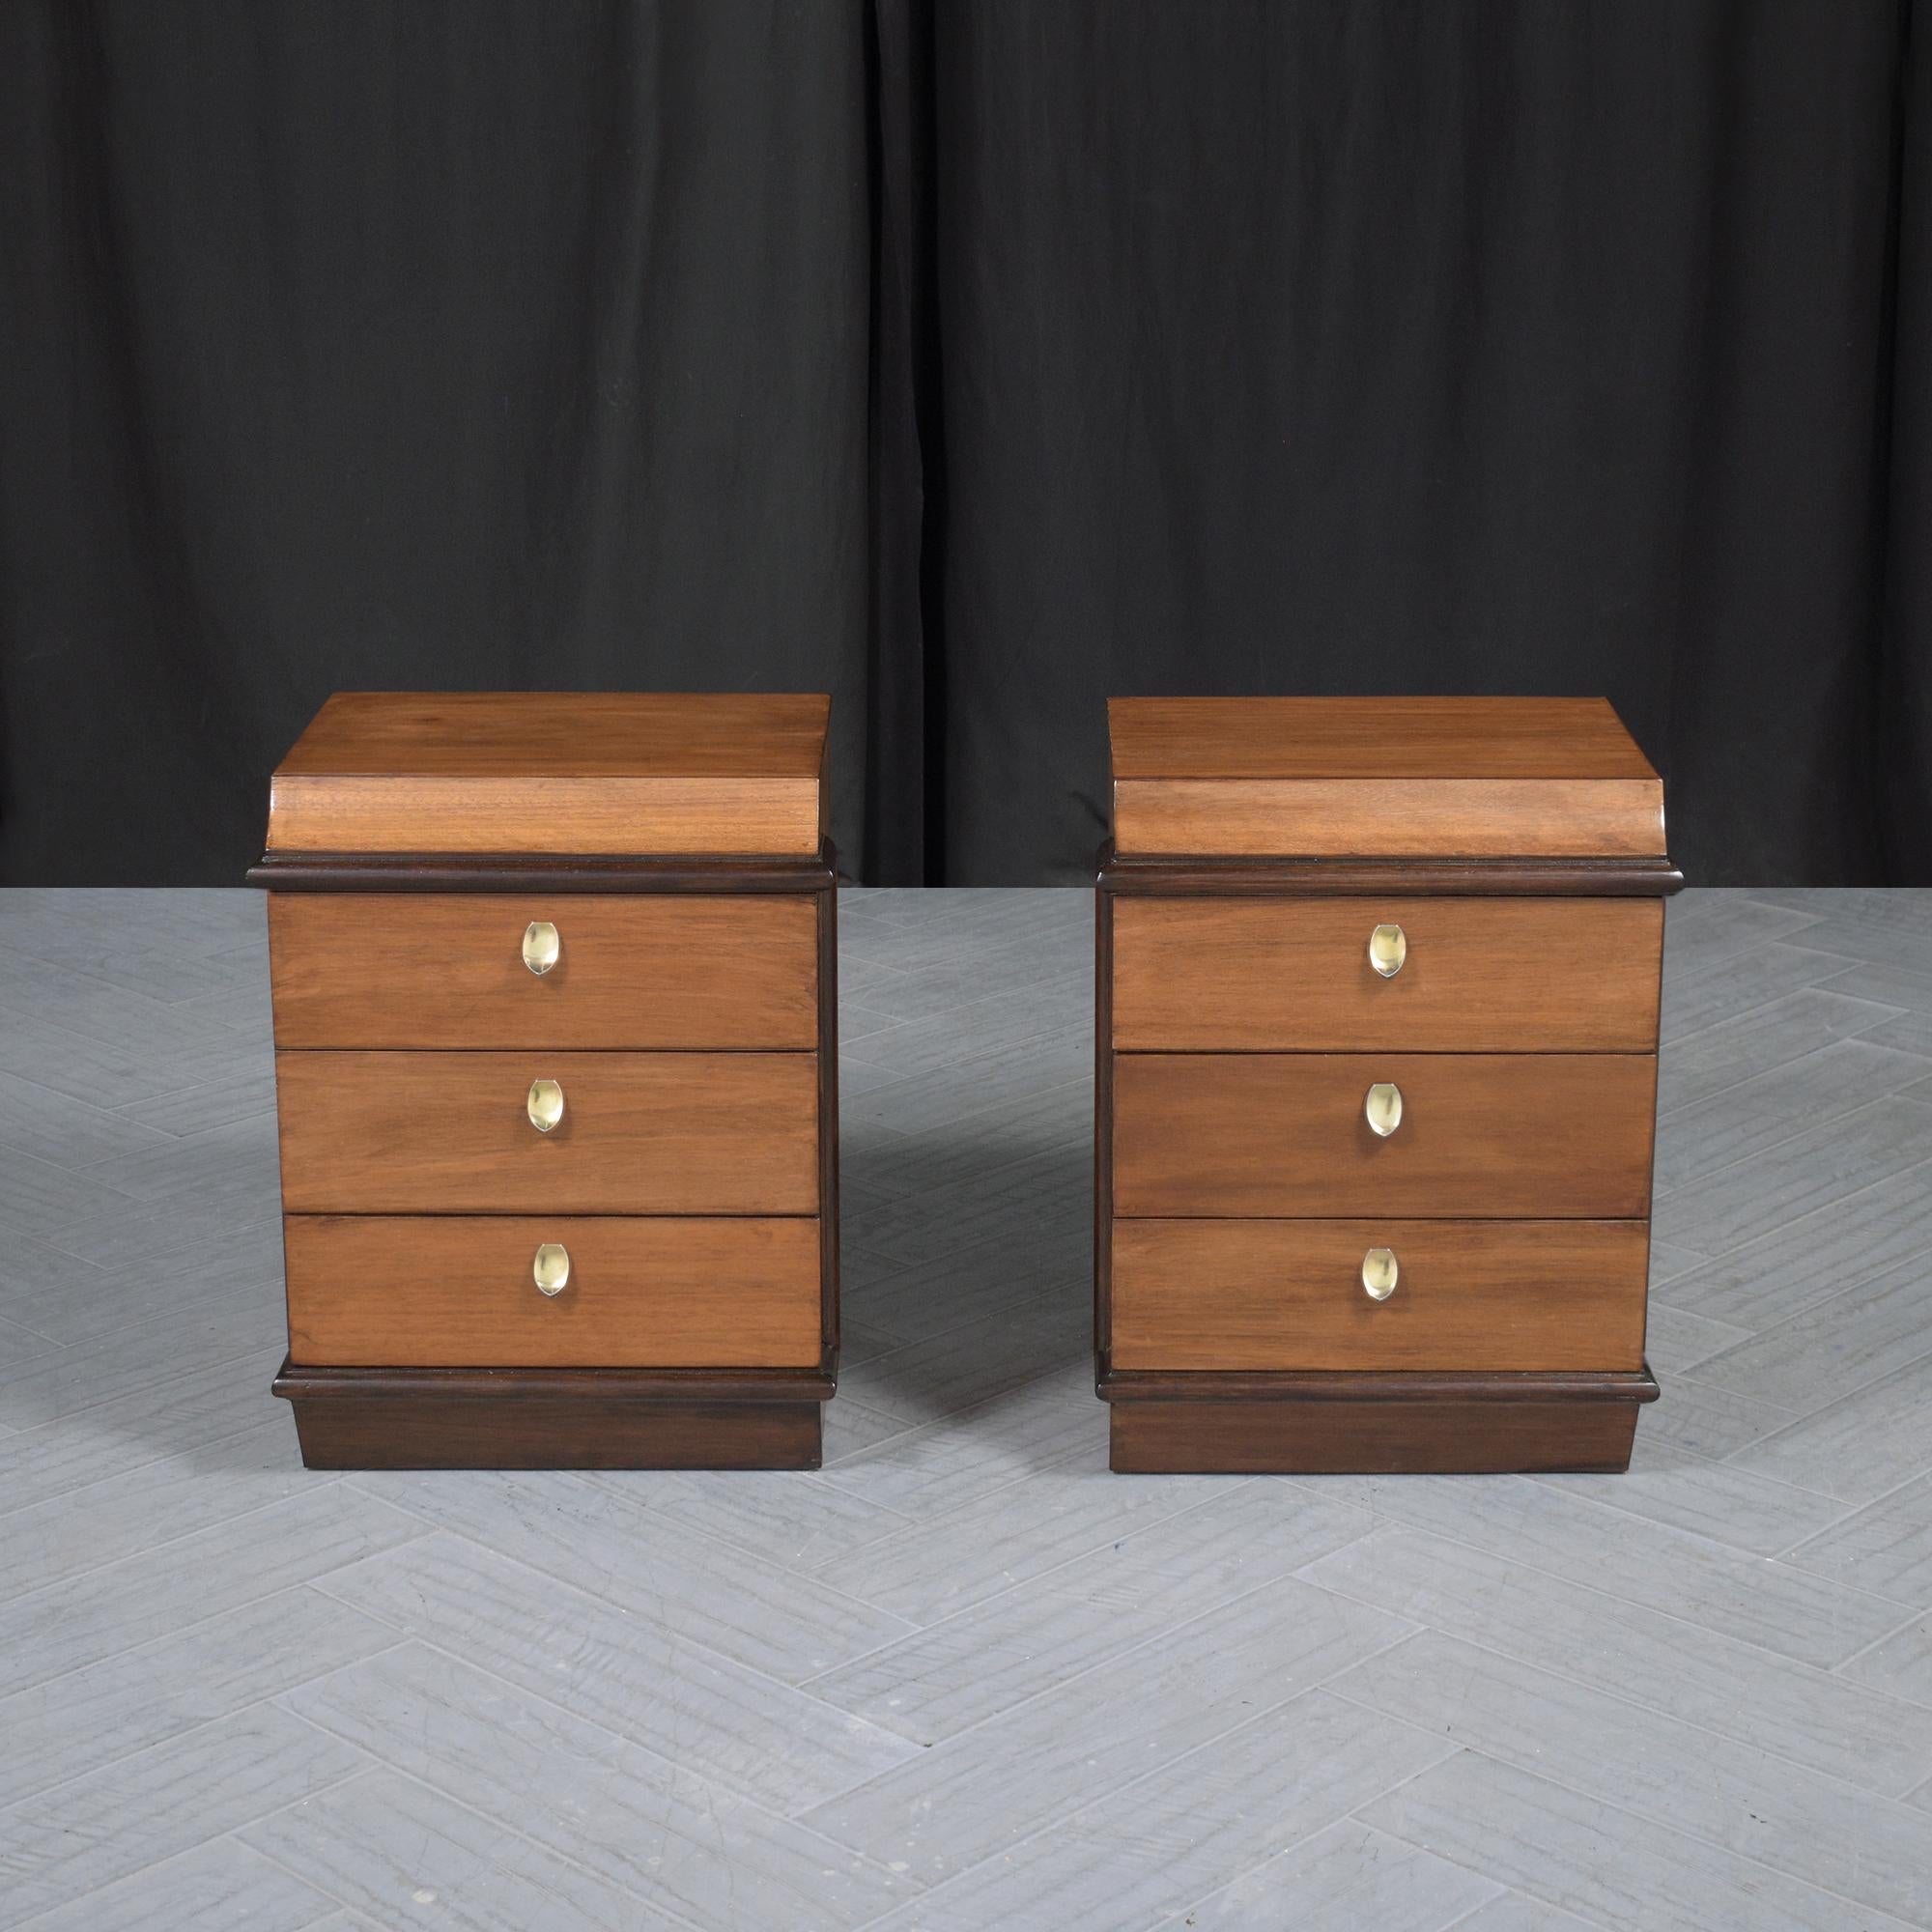 1960s Mid-Century Modern Walnut Nightstands - A Timeless Pair Restored For Sale 1